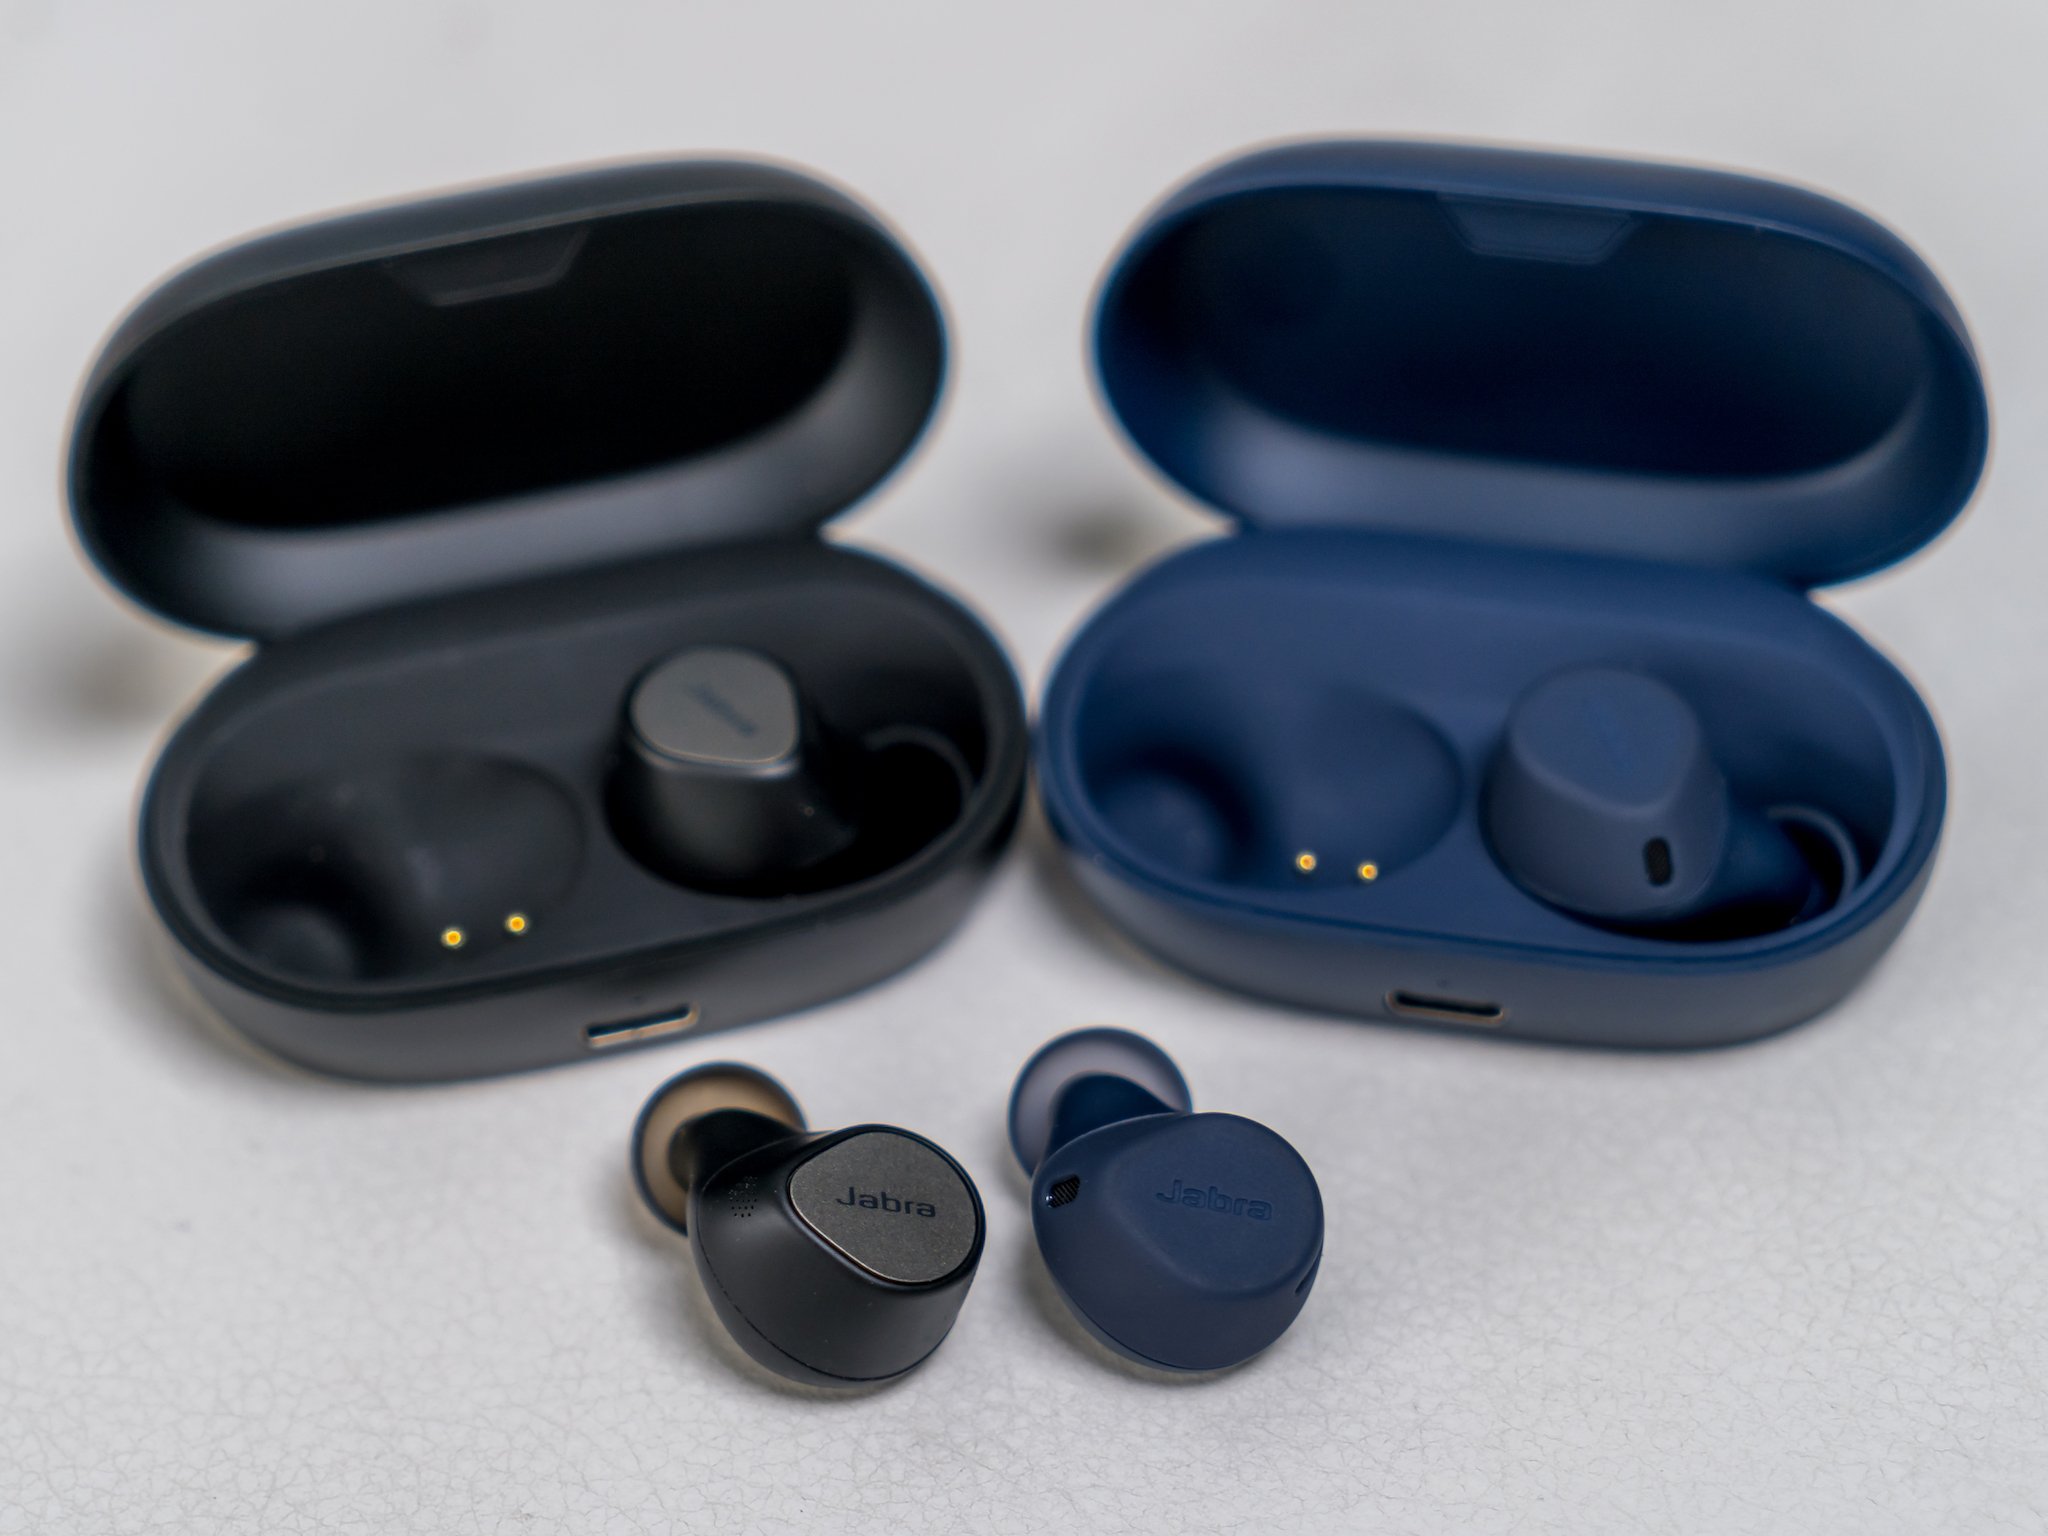 If you picked the Jabra Elite 7 earbuds, you’ll want this update